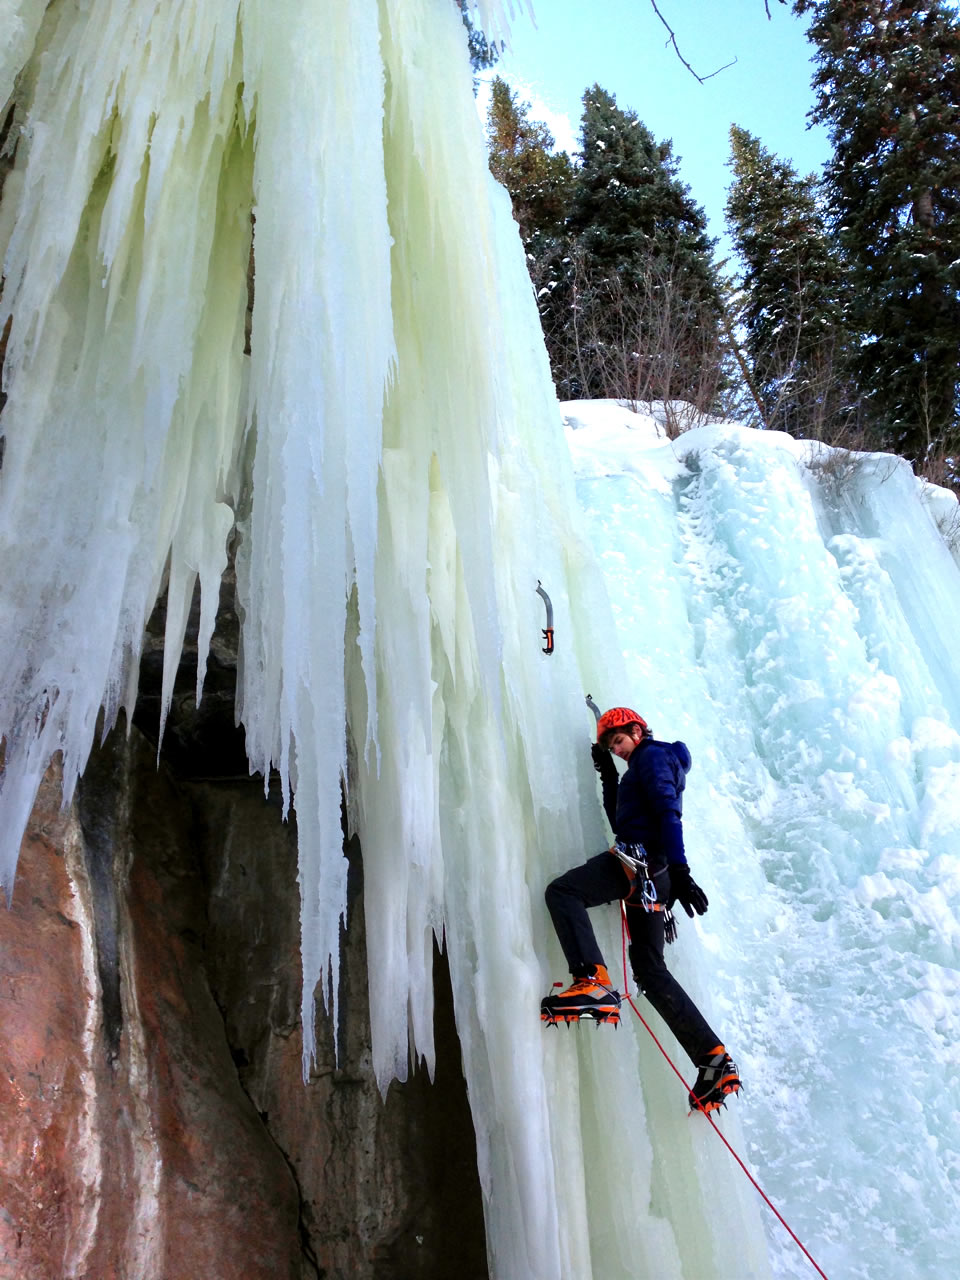 The Hi Q Luxe Pro Pull On's durable water-resistant coating and super durable fabric meant it was tough enough to climb both rock and ice in a variety of conditions. Here, Alexander Kenan takes it for a test spin on this ice curtain to the left of Spiral Staircase (WI4) in Vail, Colorado. [Photo] Travis Fried